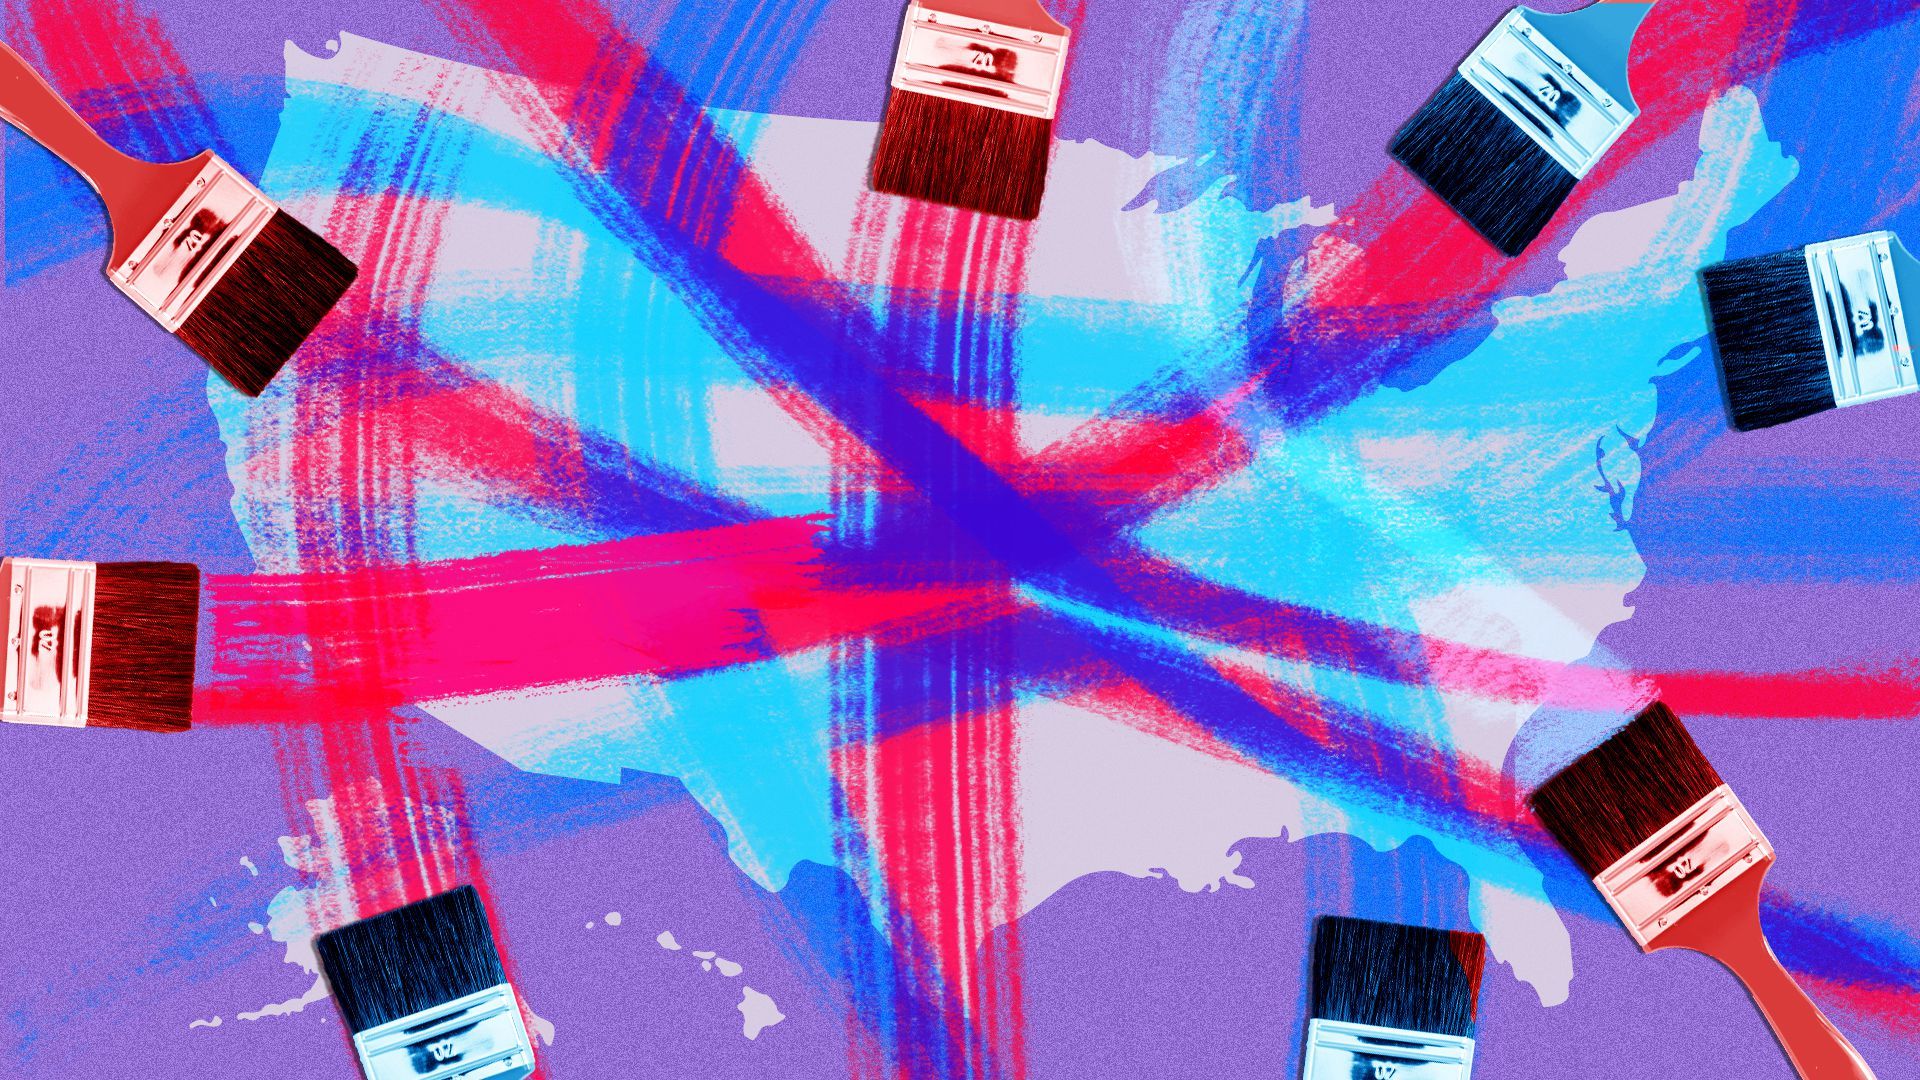  Illustration of brushes painting red and blue lines on a map of the US.